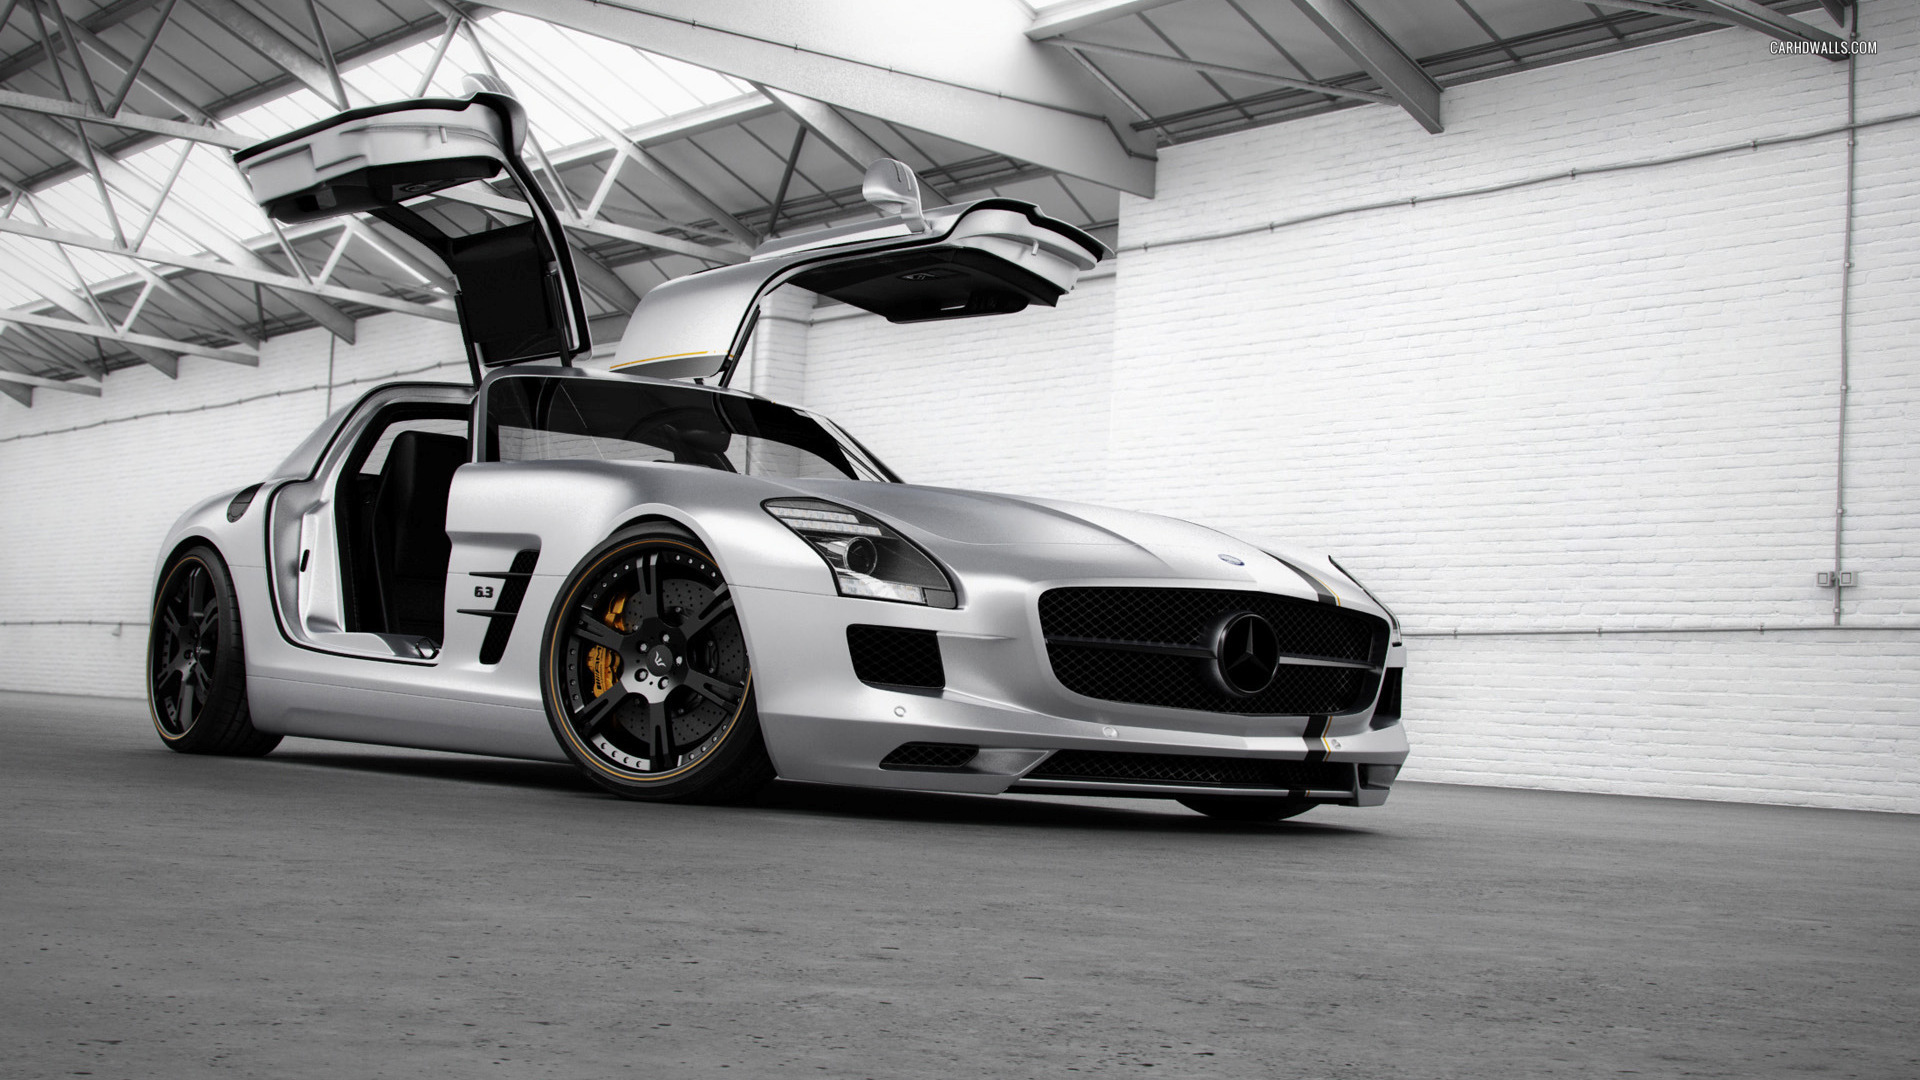 Mercedes Benz SLS AMG Wallpapers Pictures Images